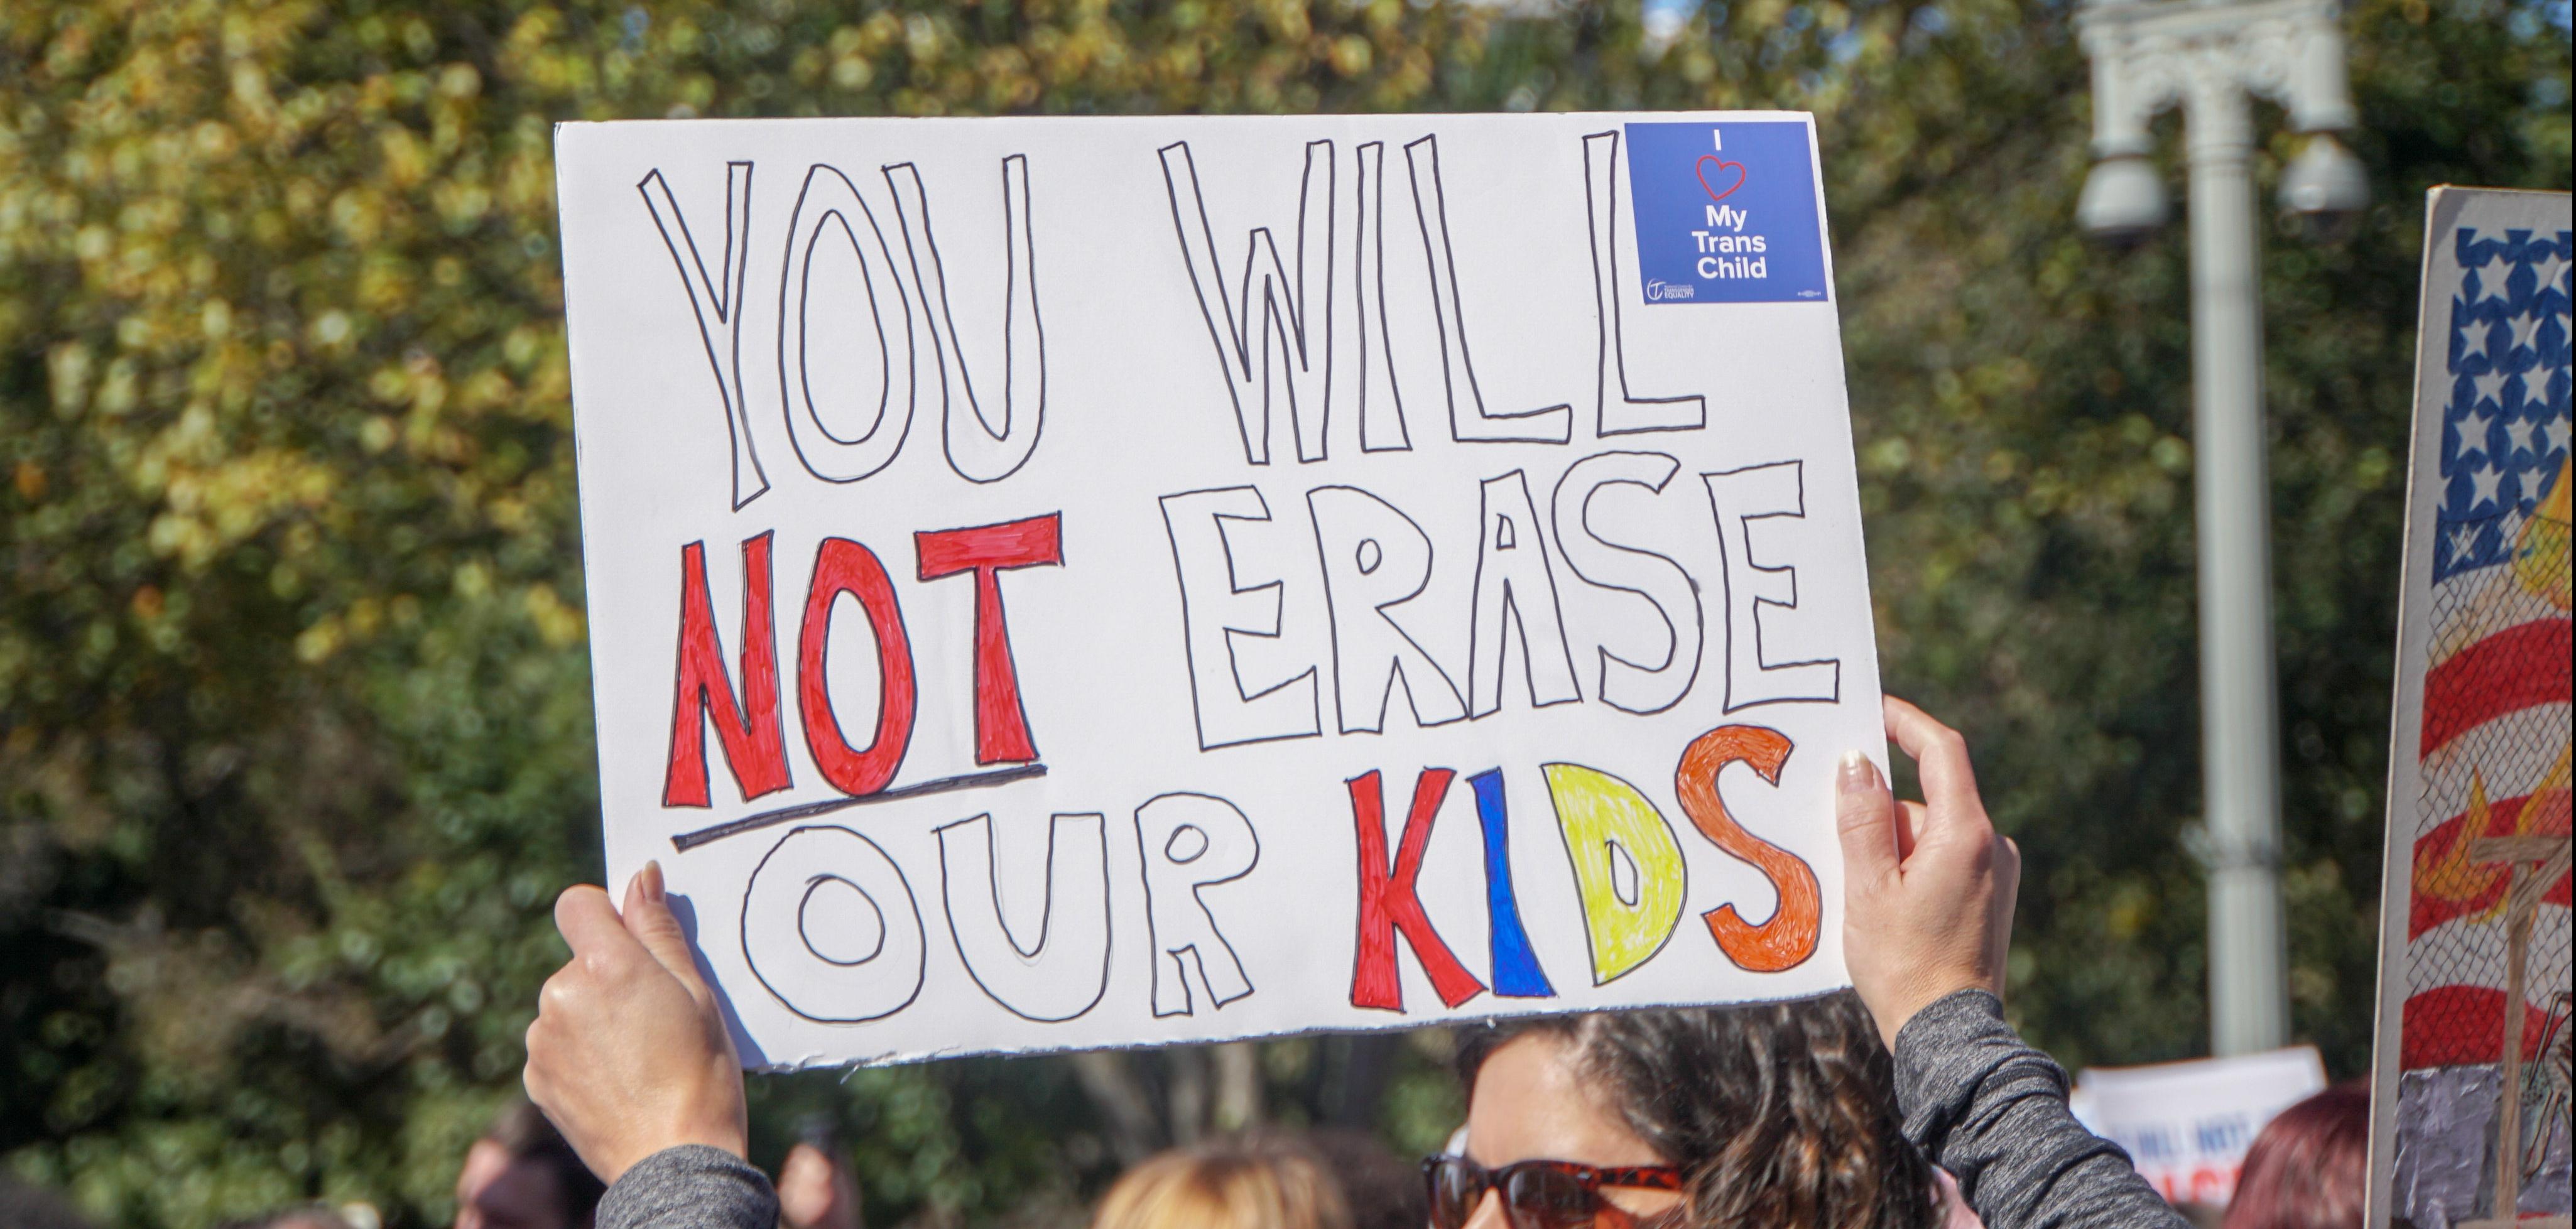 Hands holding up sign reading "You will not erase our kids"